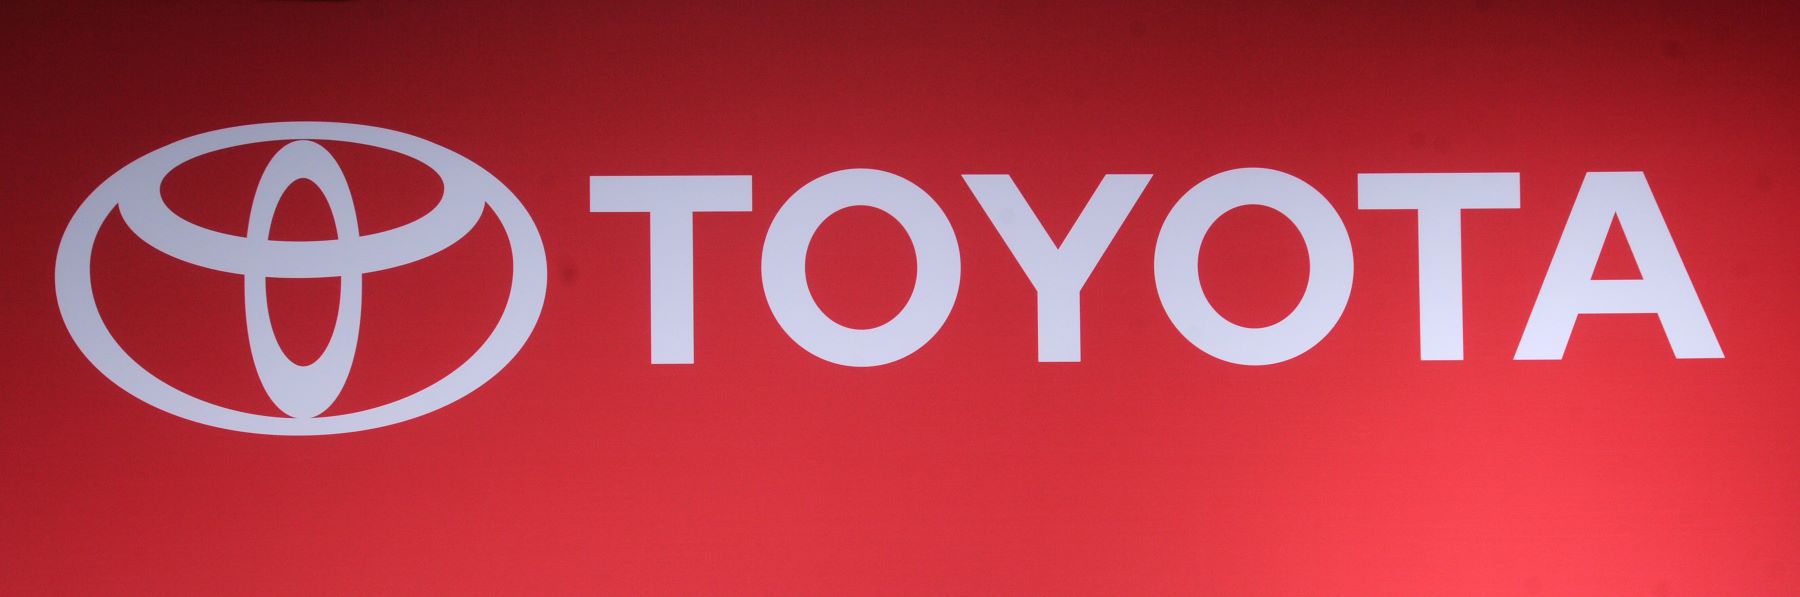 Toyota Japanese automaker logo with white text on a red background